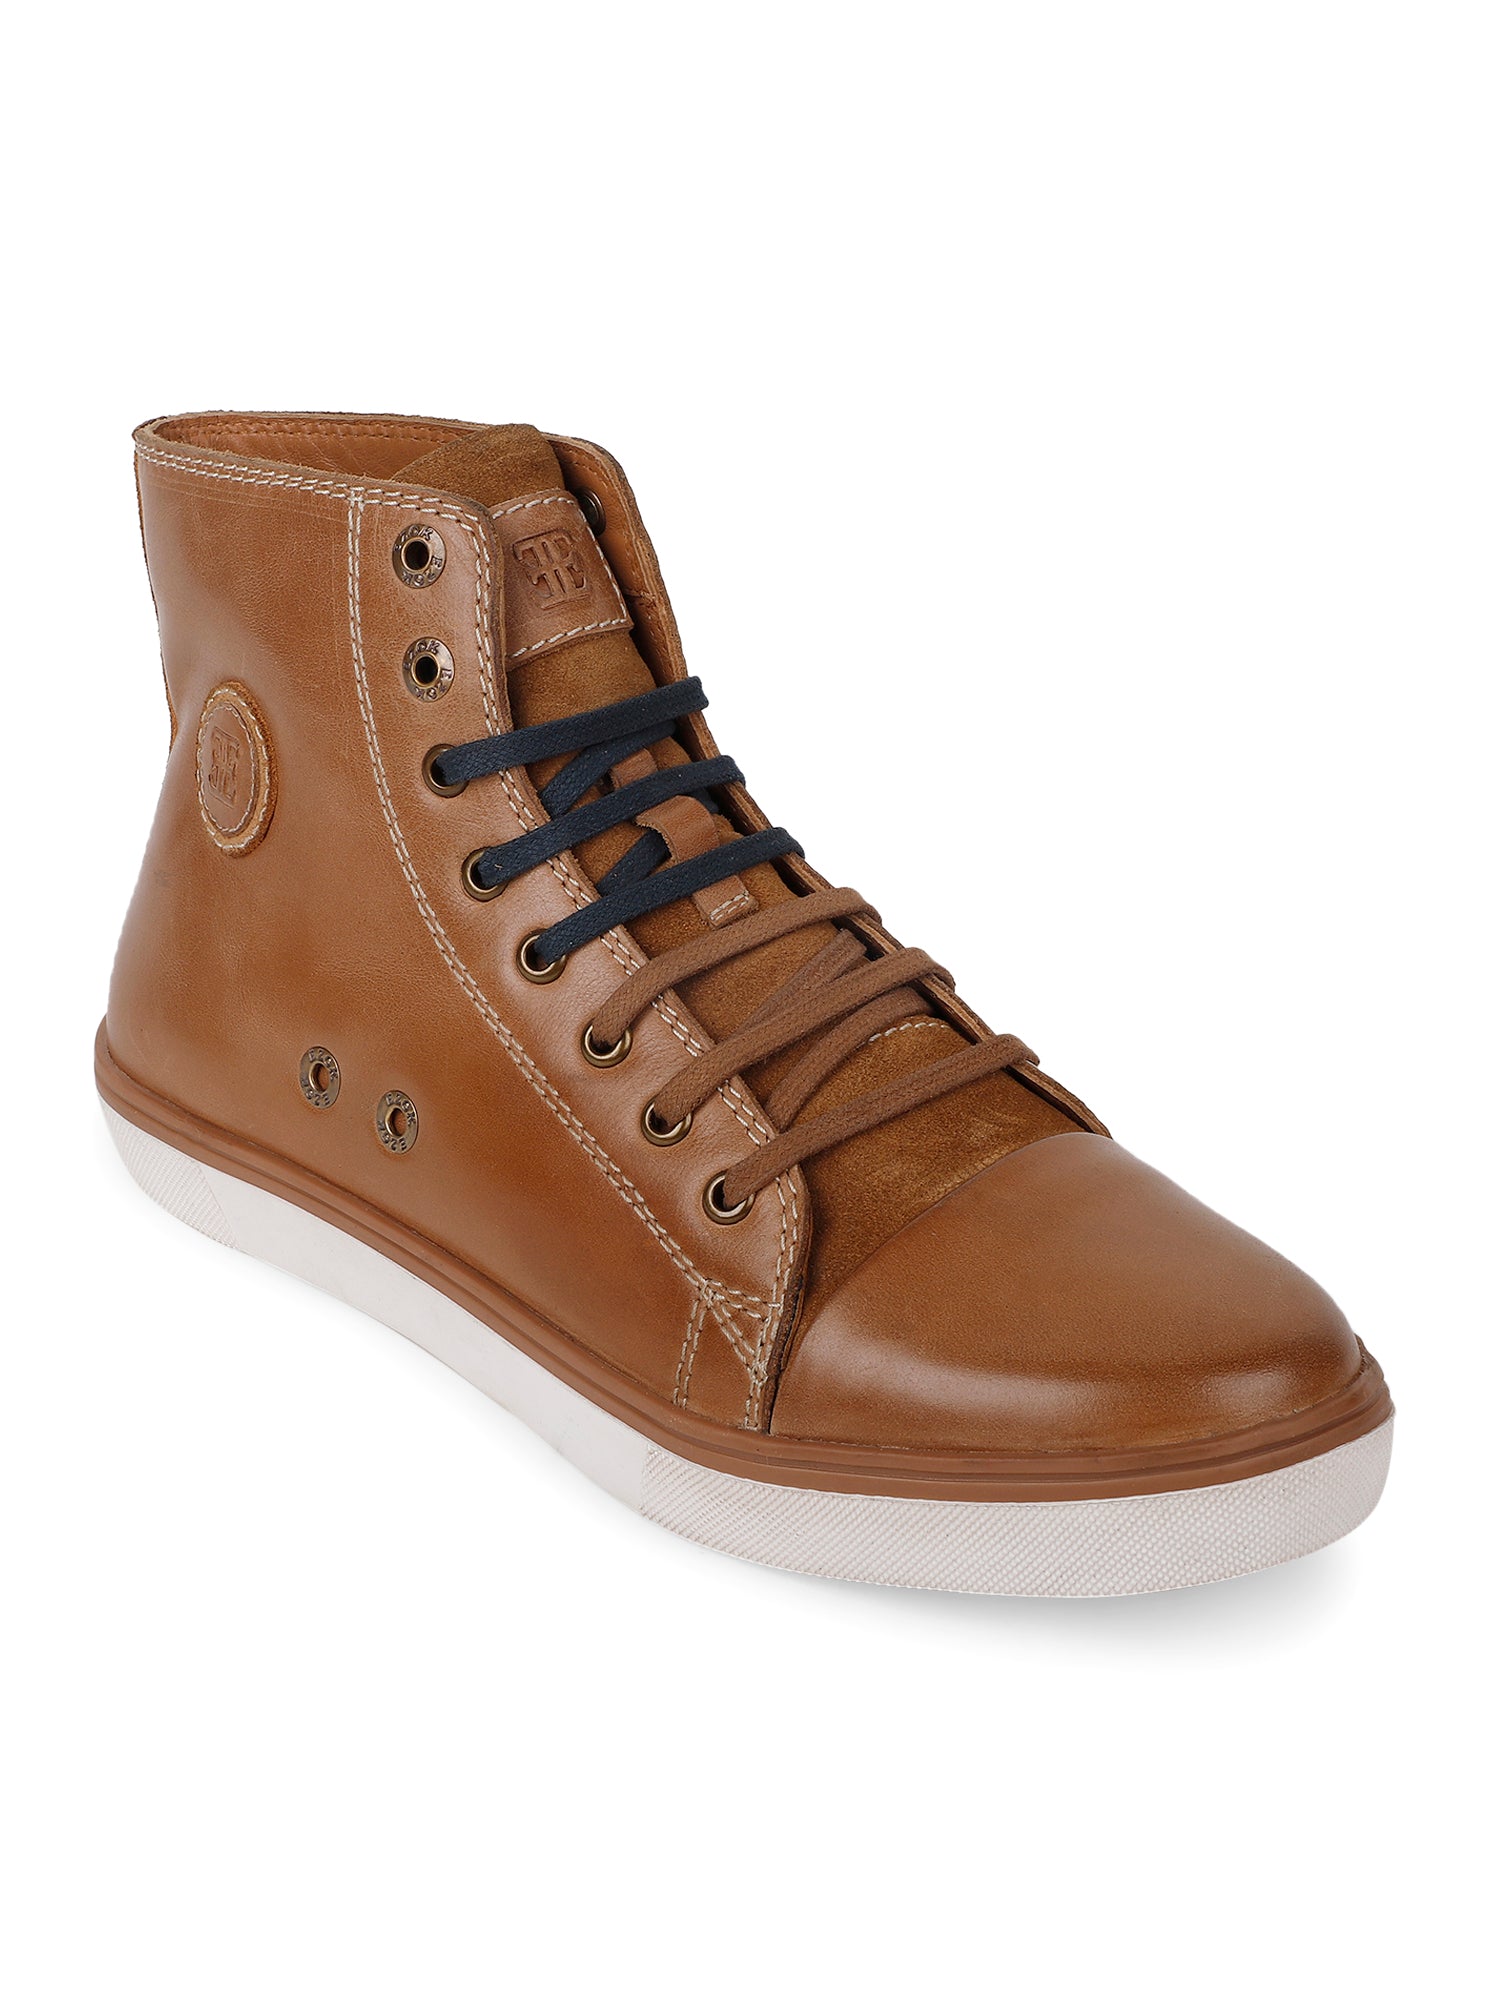 Ezok Brown Lace-ups Leather Sneakers For Men